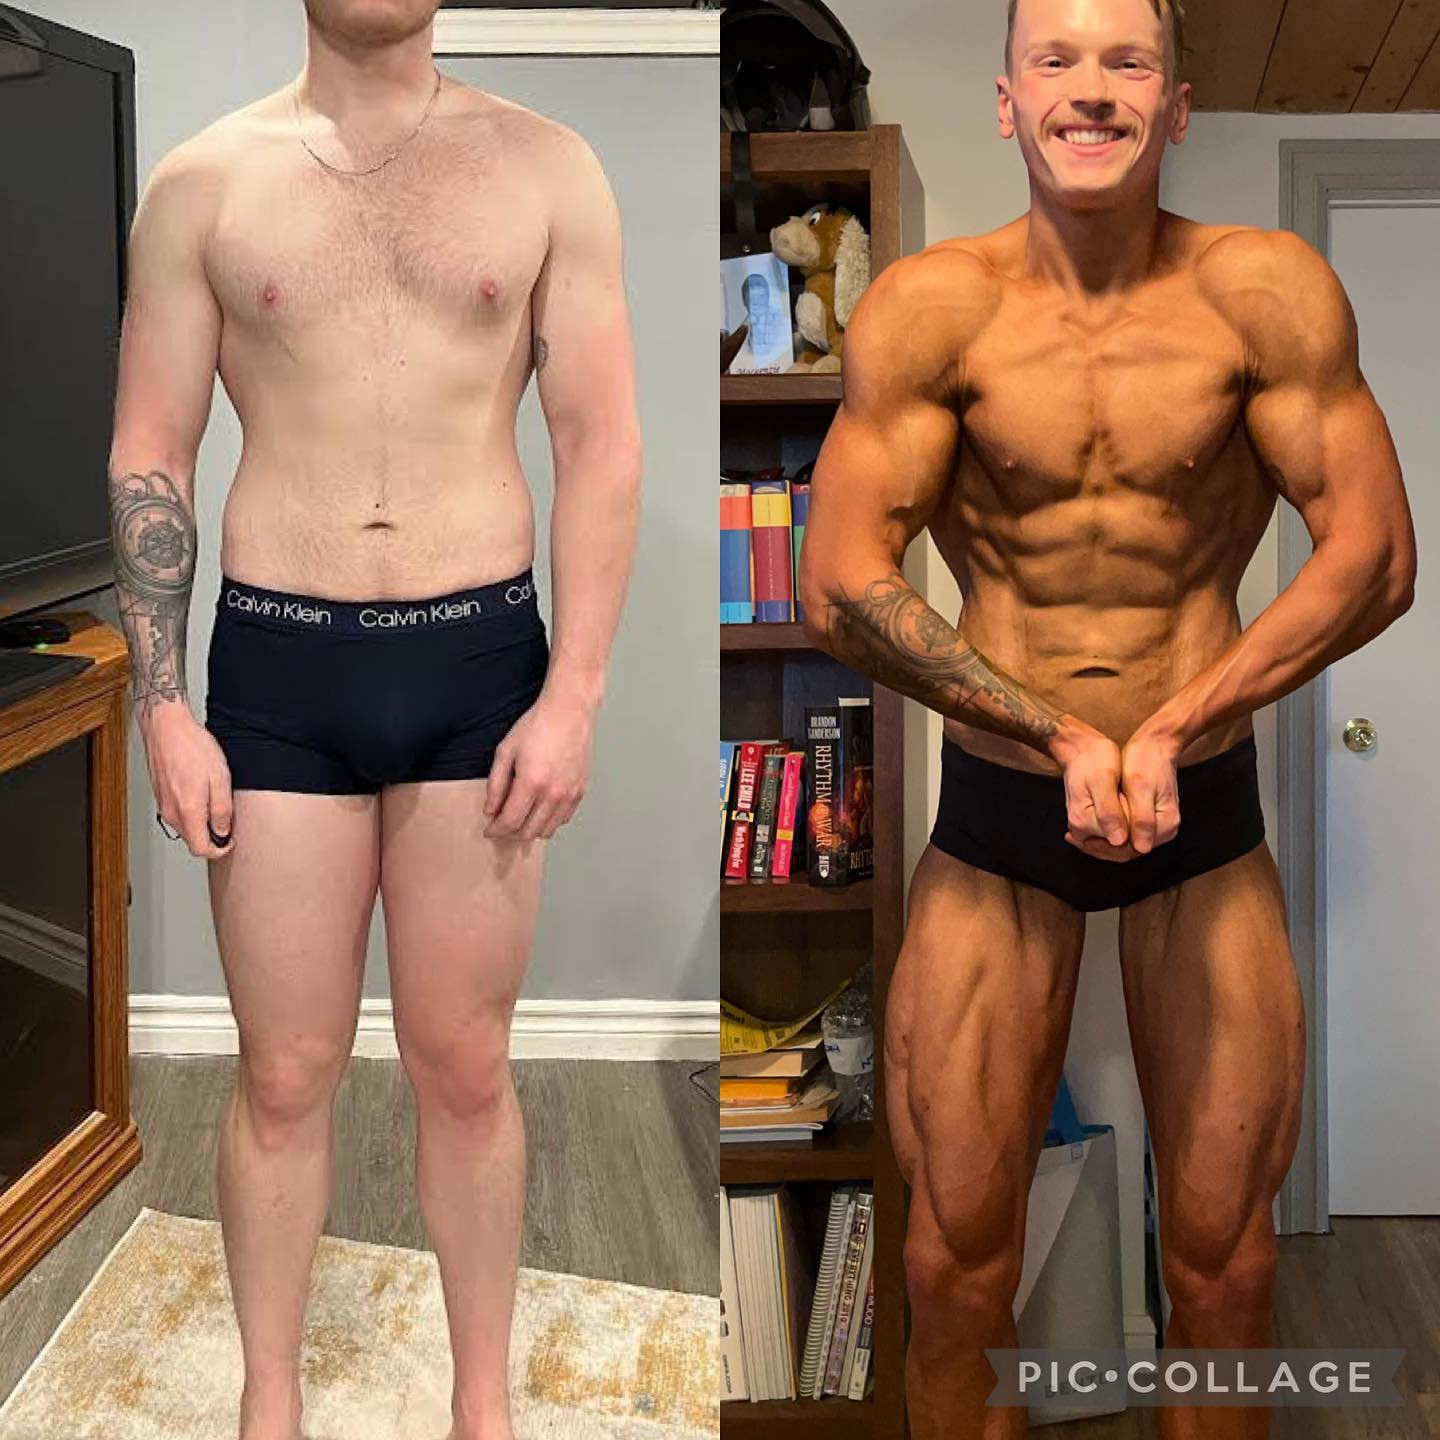 Client transformation. Split down the middle, the left image is a before shot of a male in boxers showing his physique. The right image is an after shot of his transformation becoming more muscular and flexing for the photo.